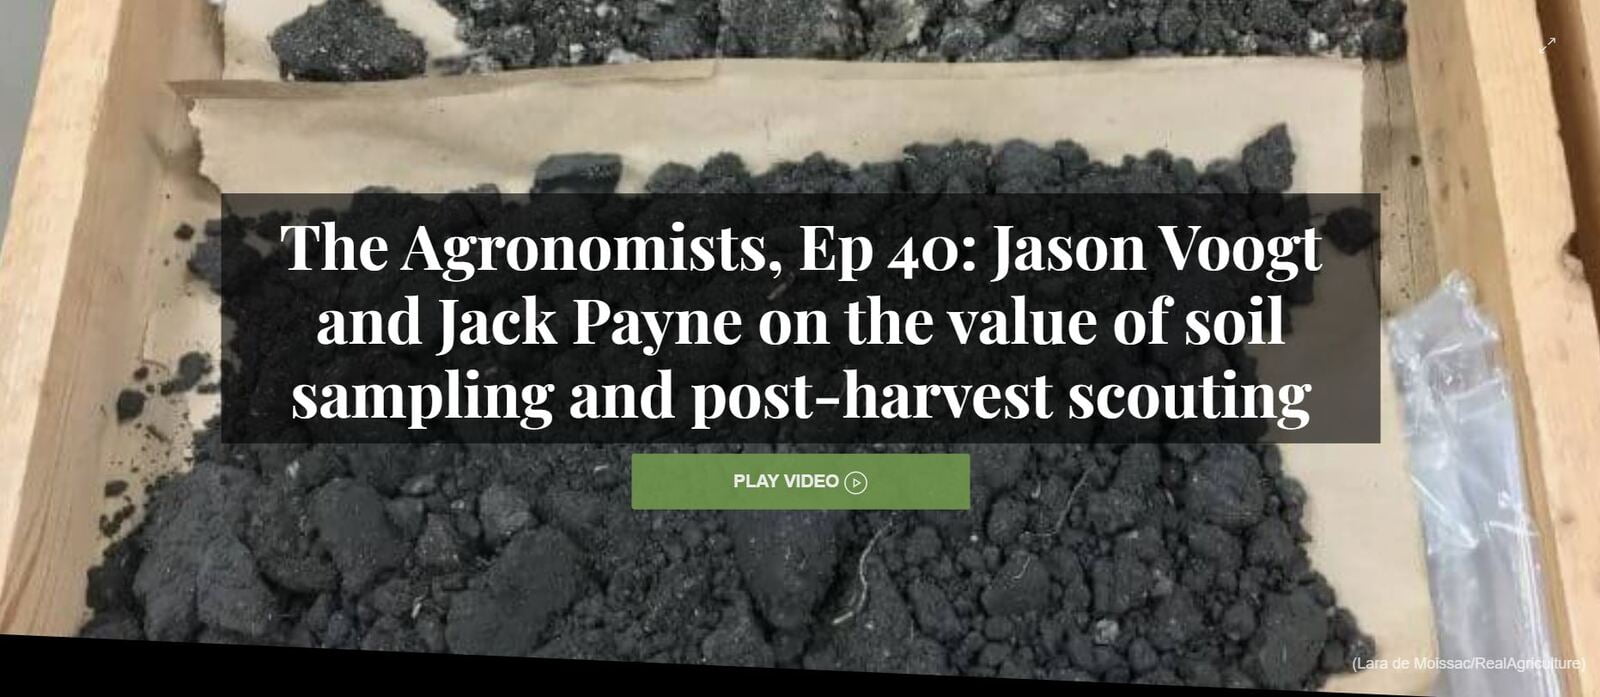 The Agronomists, Ep 40: Jason Voogt and Jack Payne on the value of soil sampling and post-harvest scouting